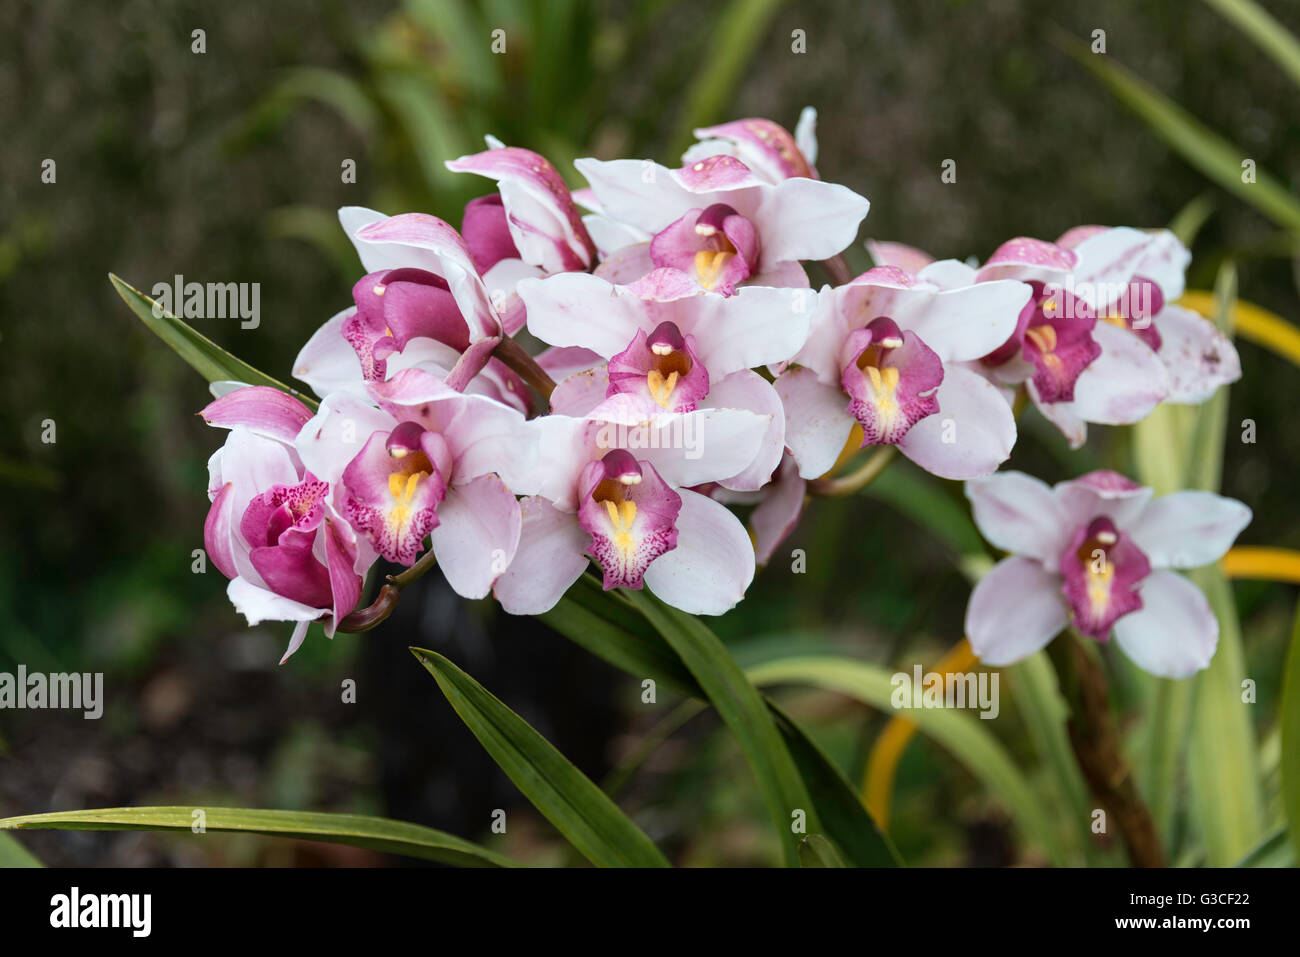 Orchidea with purple and white on madeira portuguese island Stock Photo